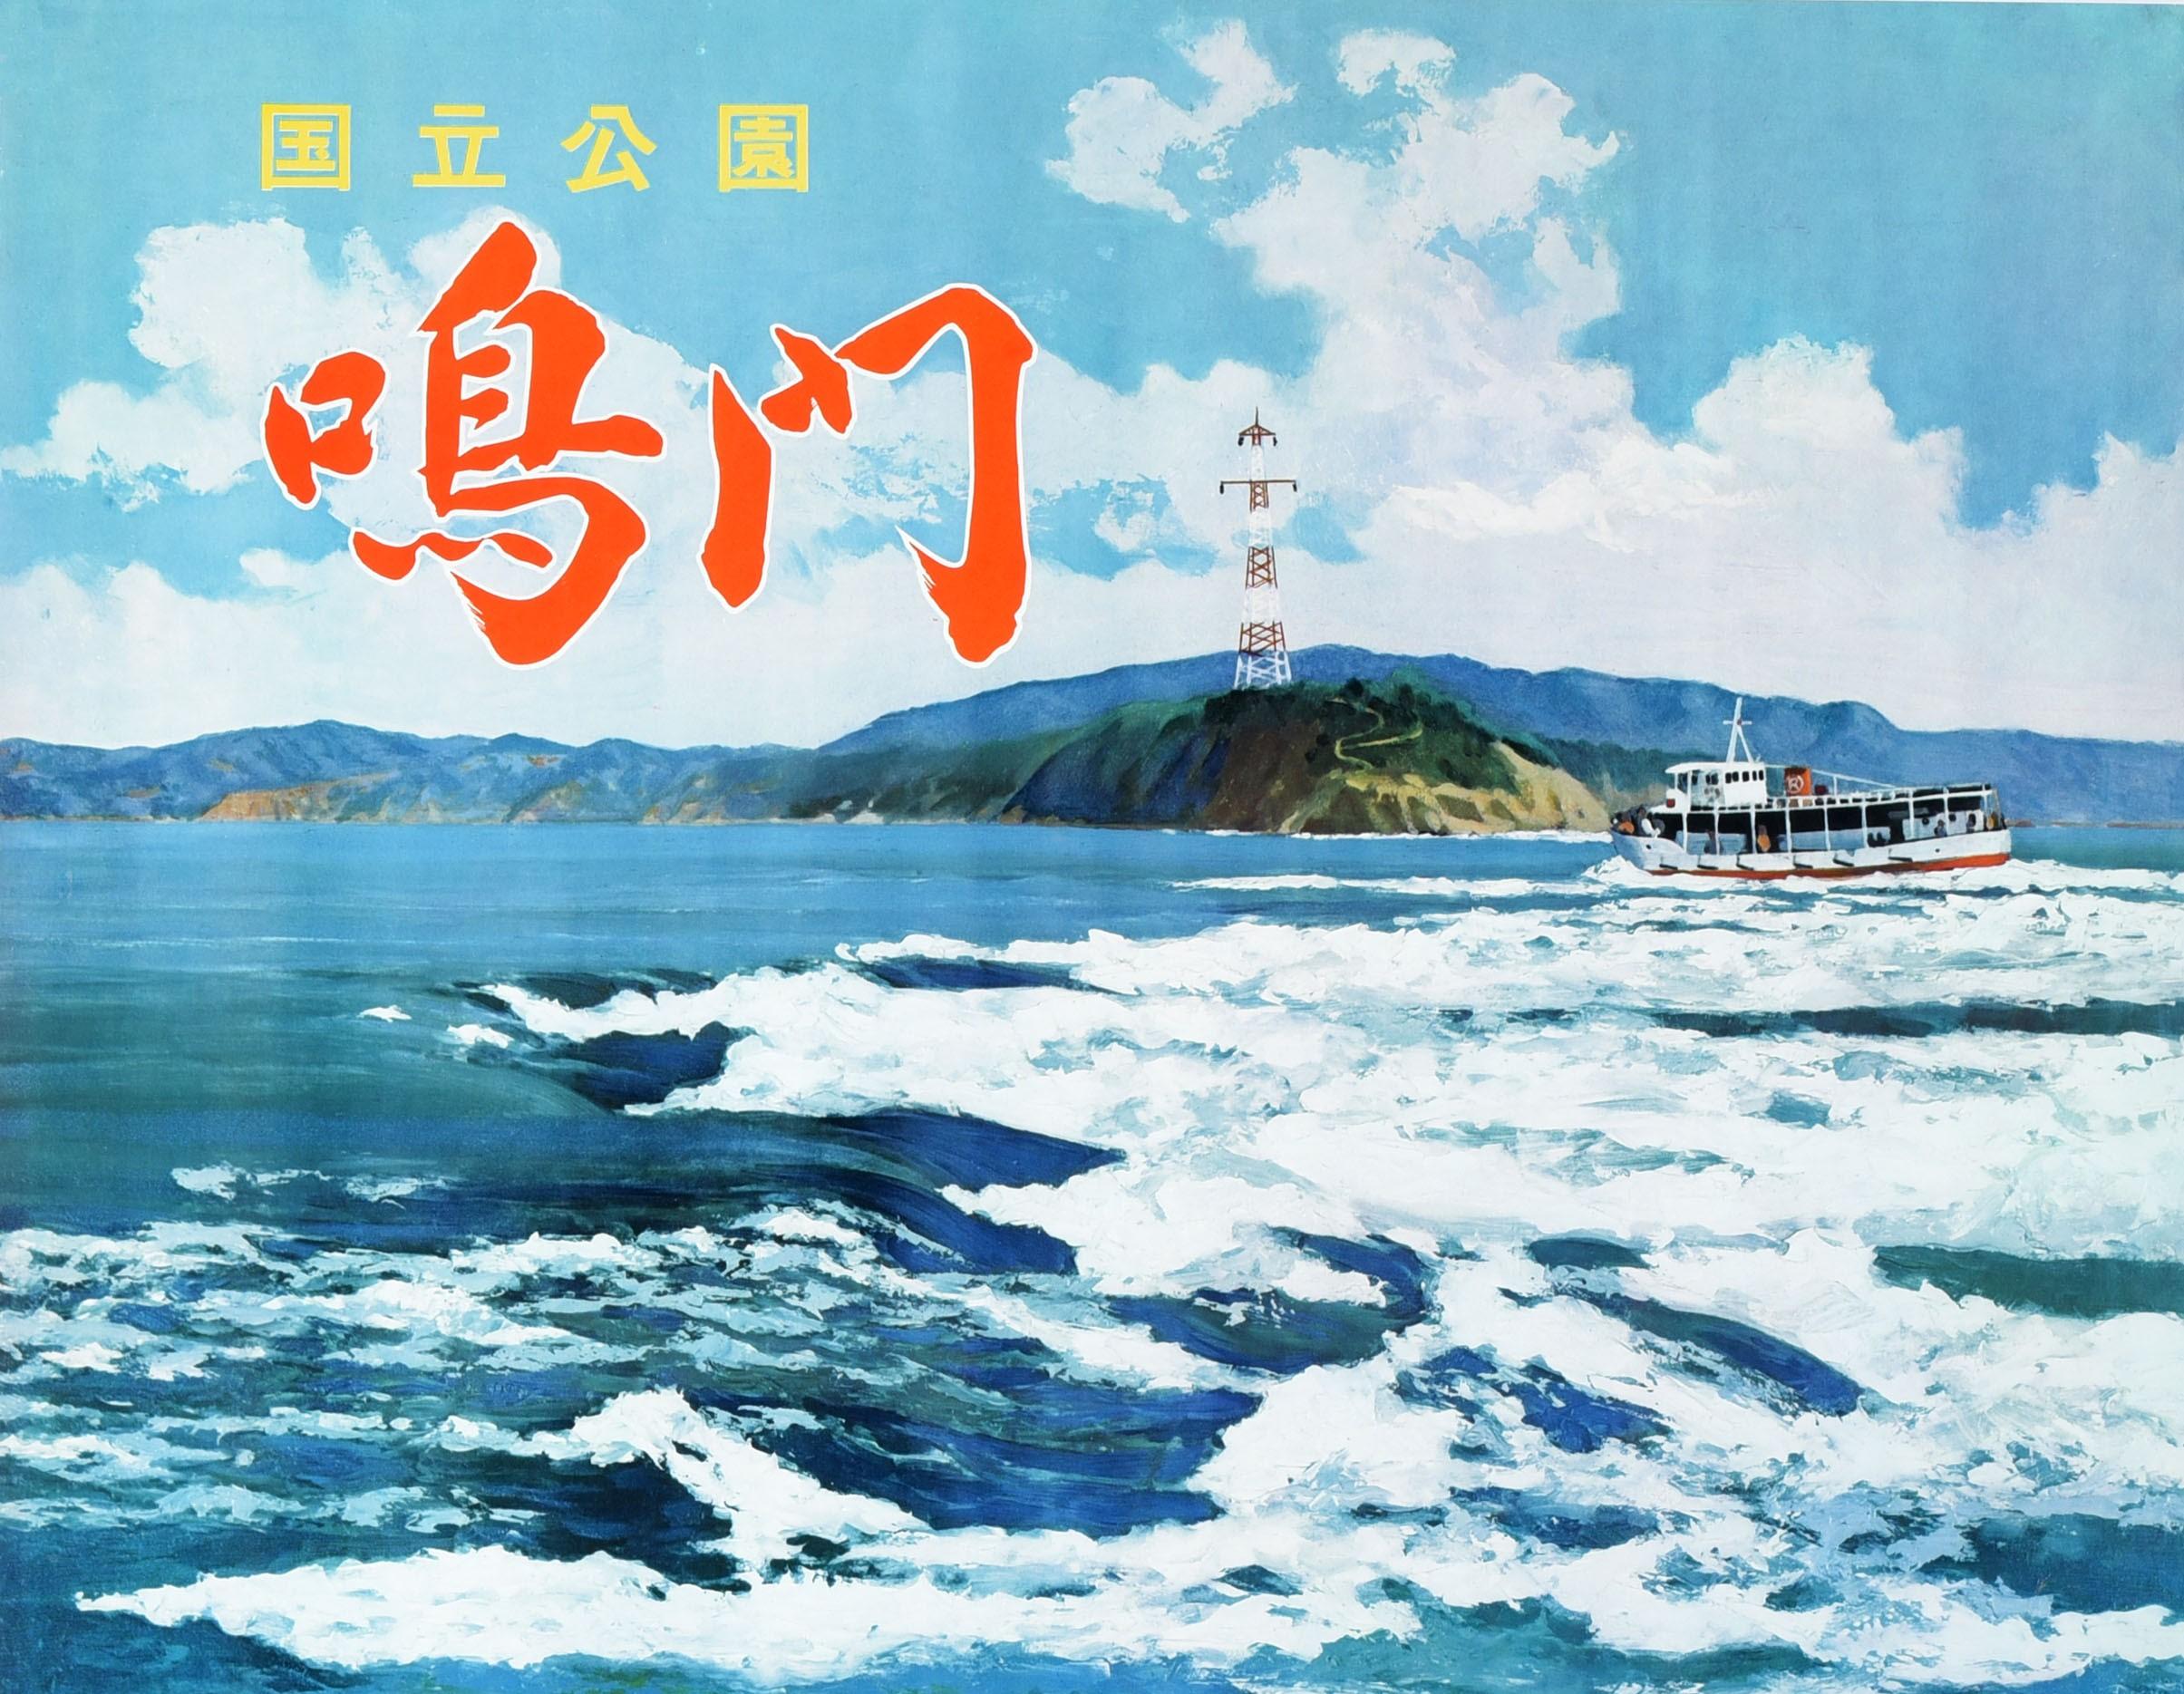 Original vintage travel poster for the Naruto National Park featuring a tourist boat on the Seto Inland Sea on the other side of the waves caused by the Naruto whirlpools ????? in the foreground, a red and white tower visible on the hill on the